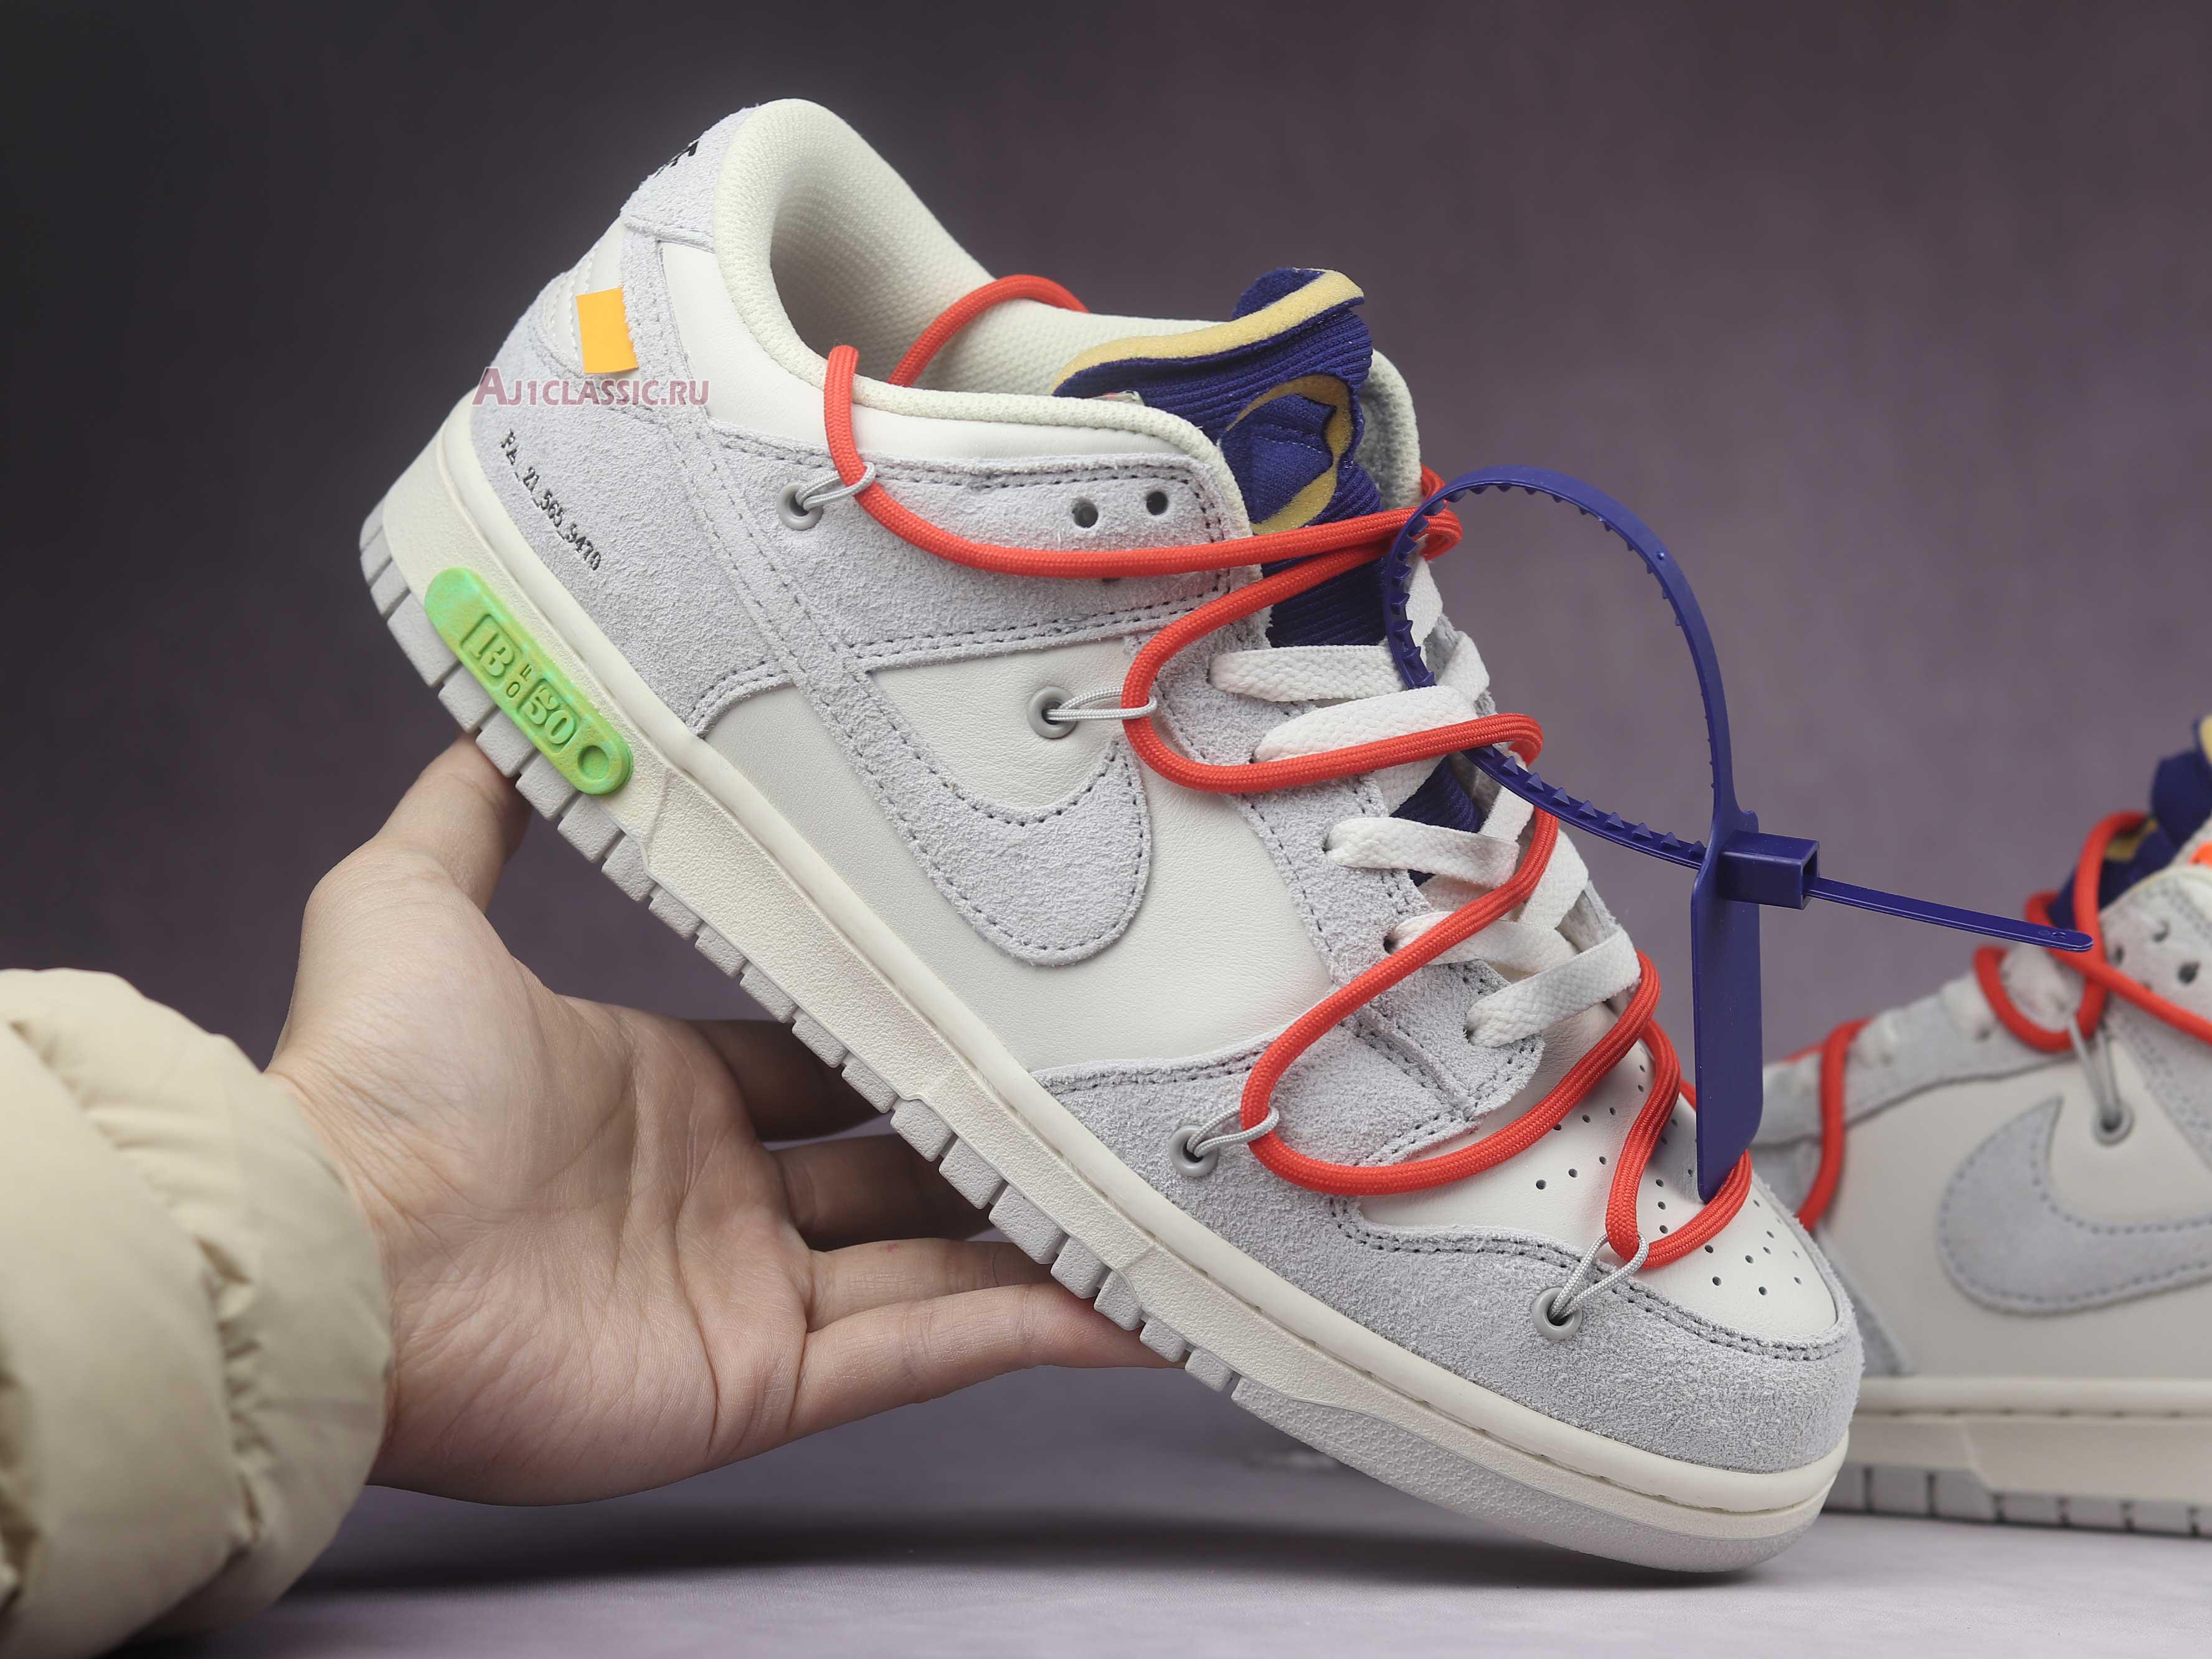 Off-White x Nike Dunk Low "Lot 13 of 50" DJ0950-110